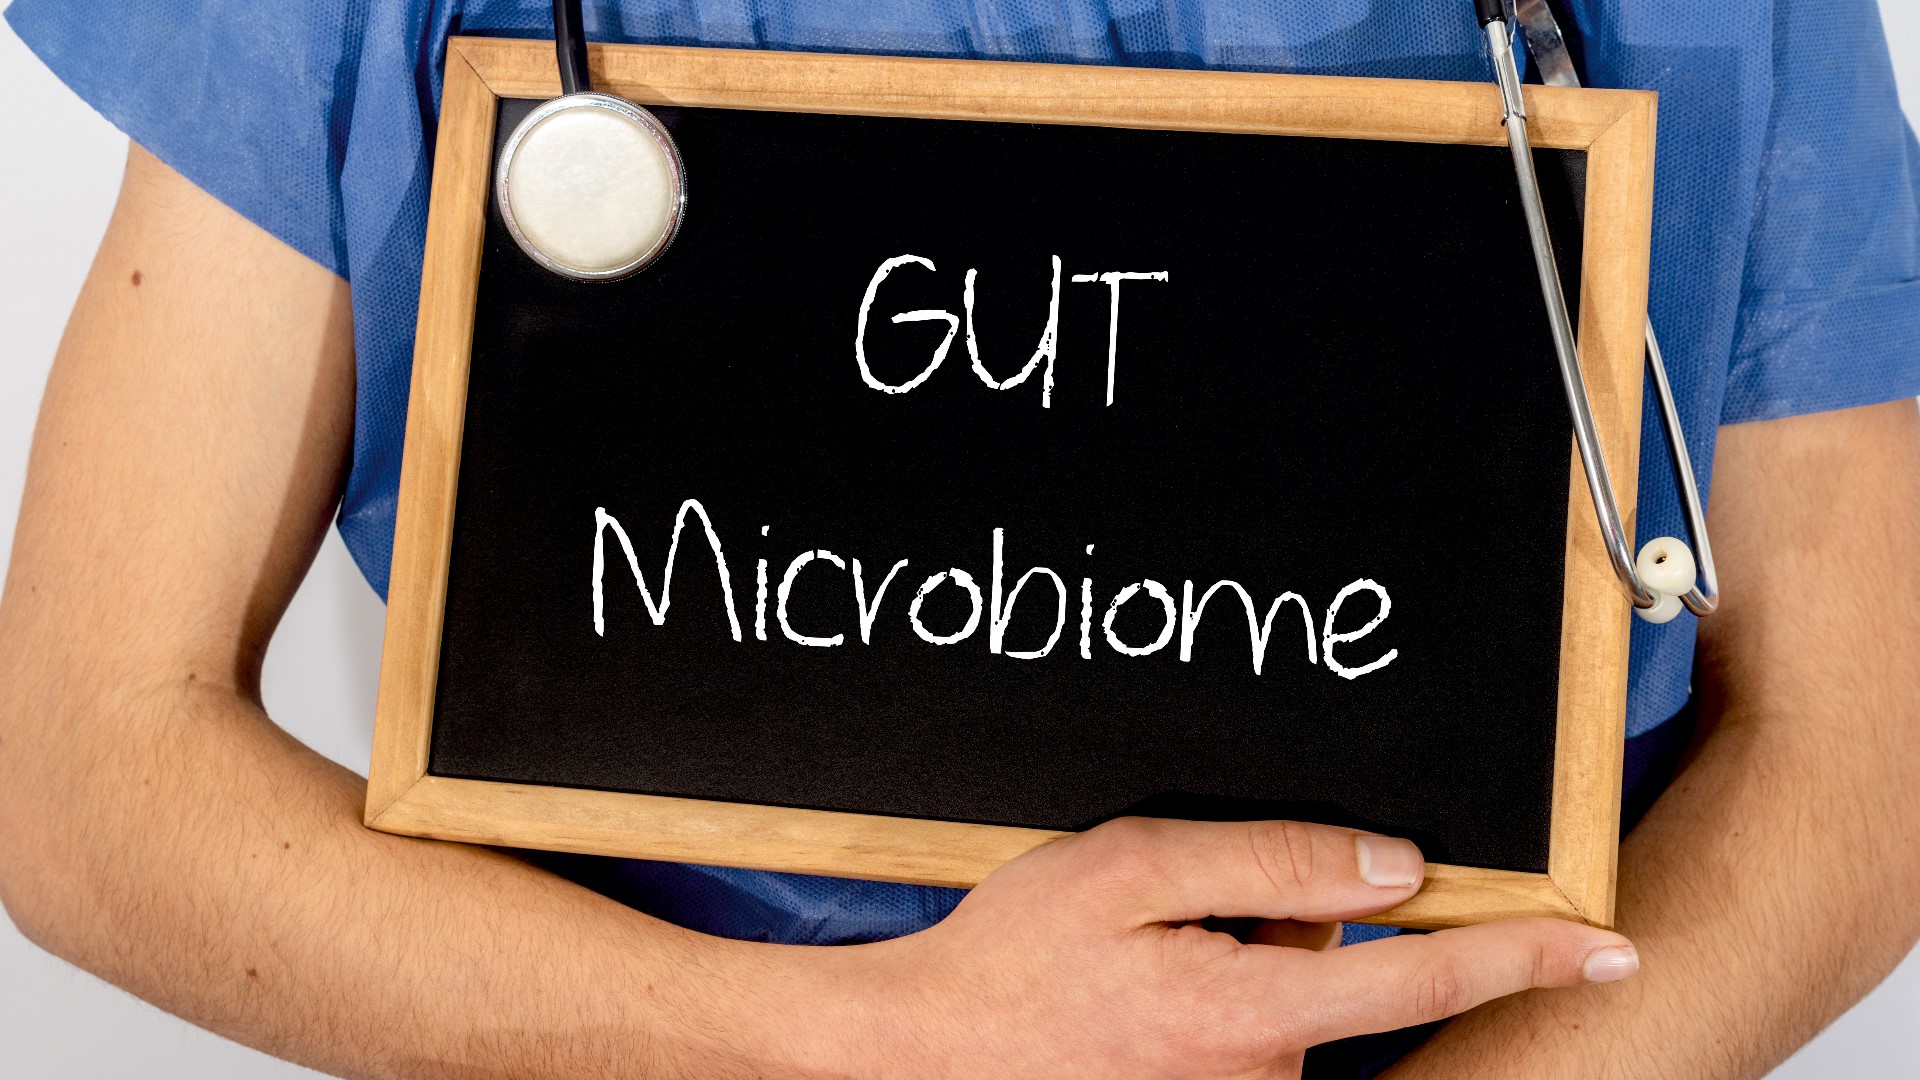 Dr. Munzer Sundos, Nupeutics Health founder and nutrition and functional ingredients specialist, suggests five ways you can improve your gut microbiome.